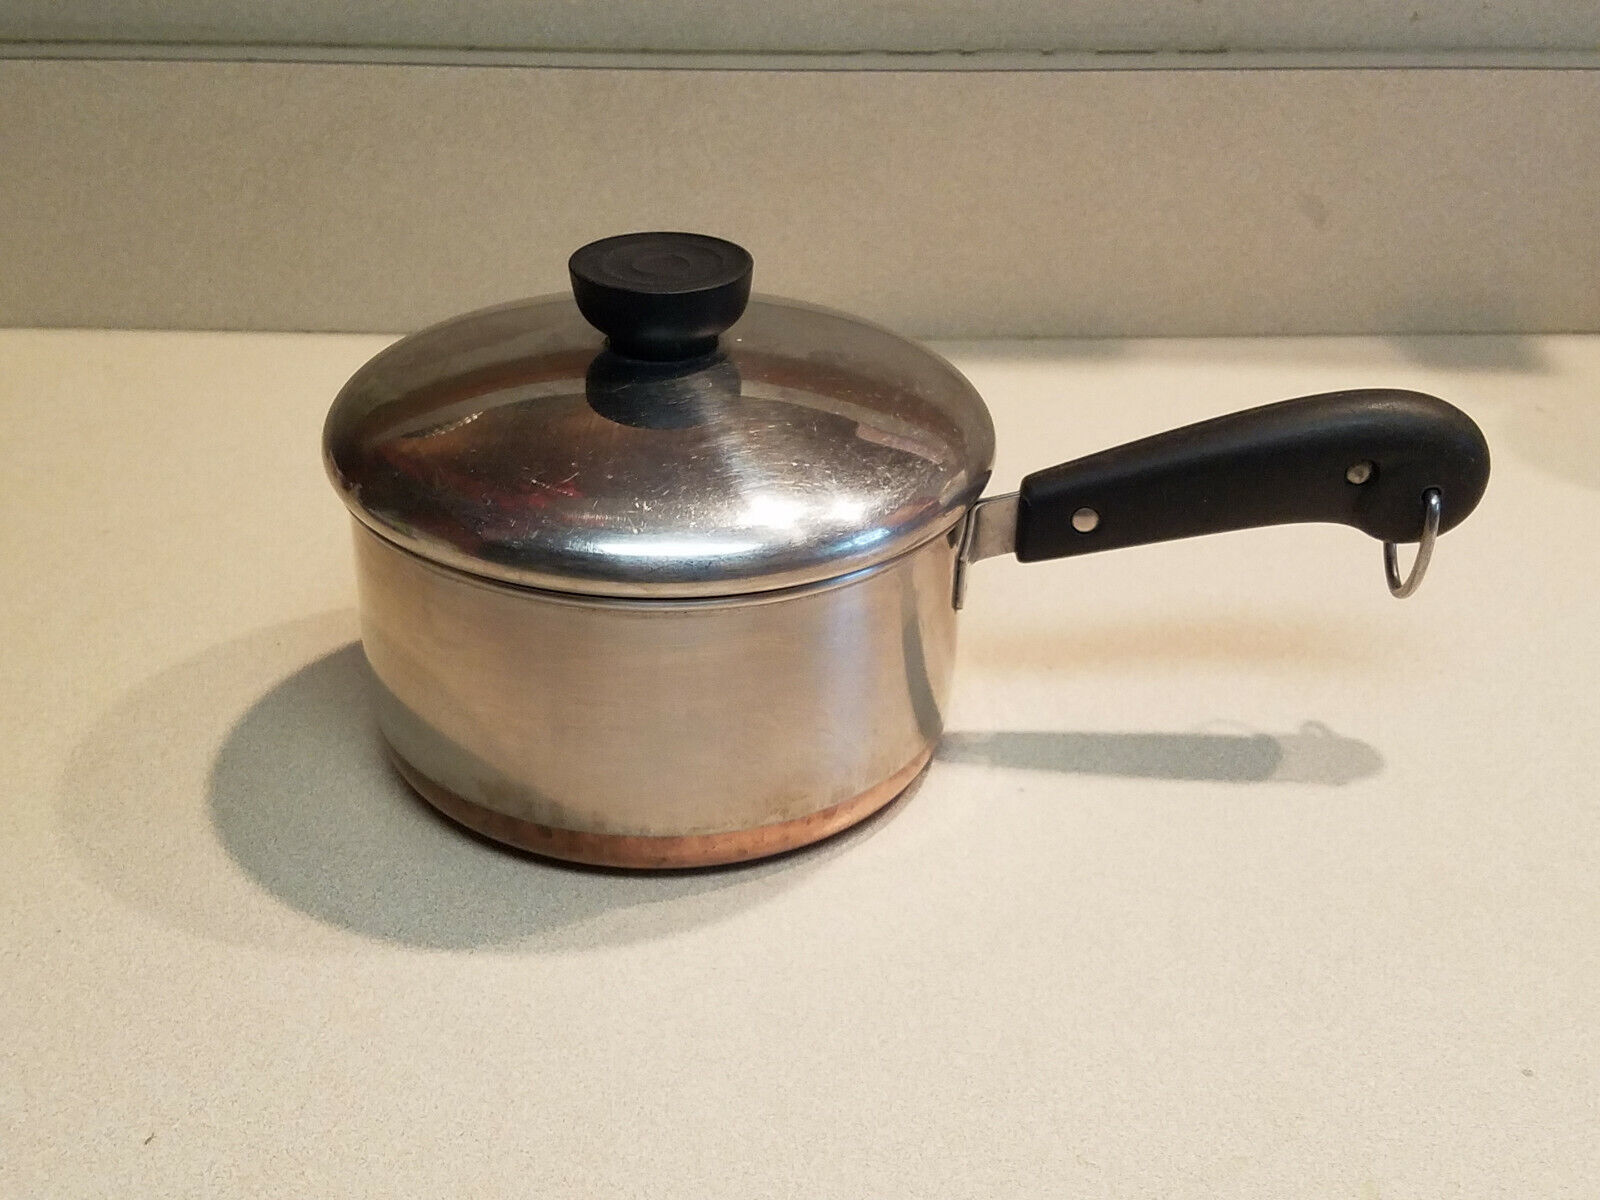 Unusual Revere Ware 1801 Stainless Copper Bottom Cookware 3 Qt 2 Qt 8  Skillet